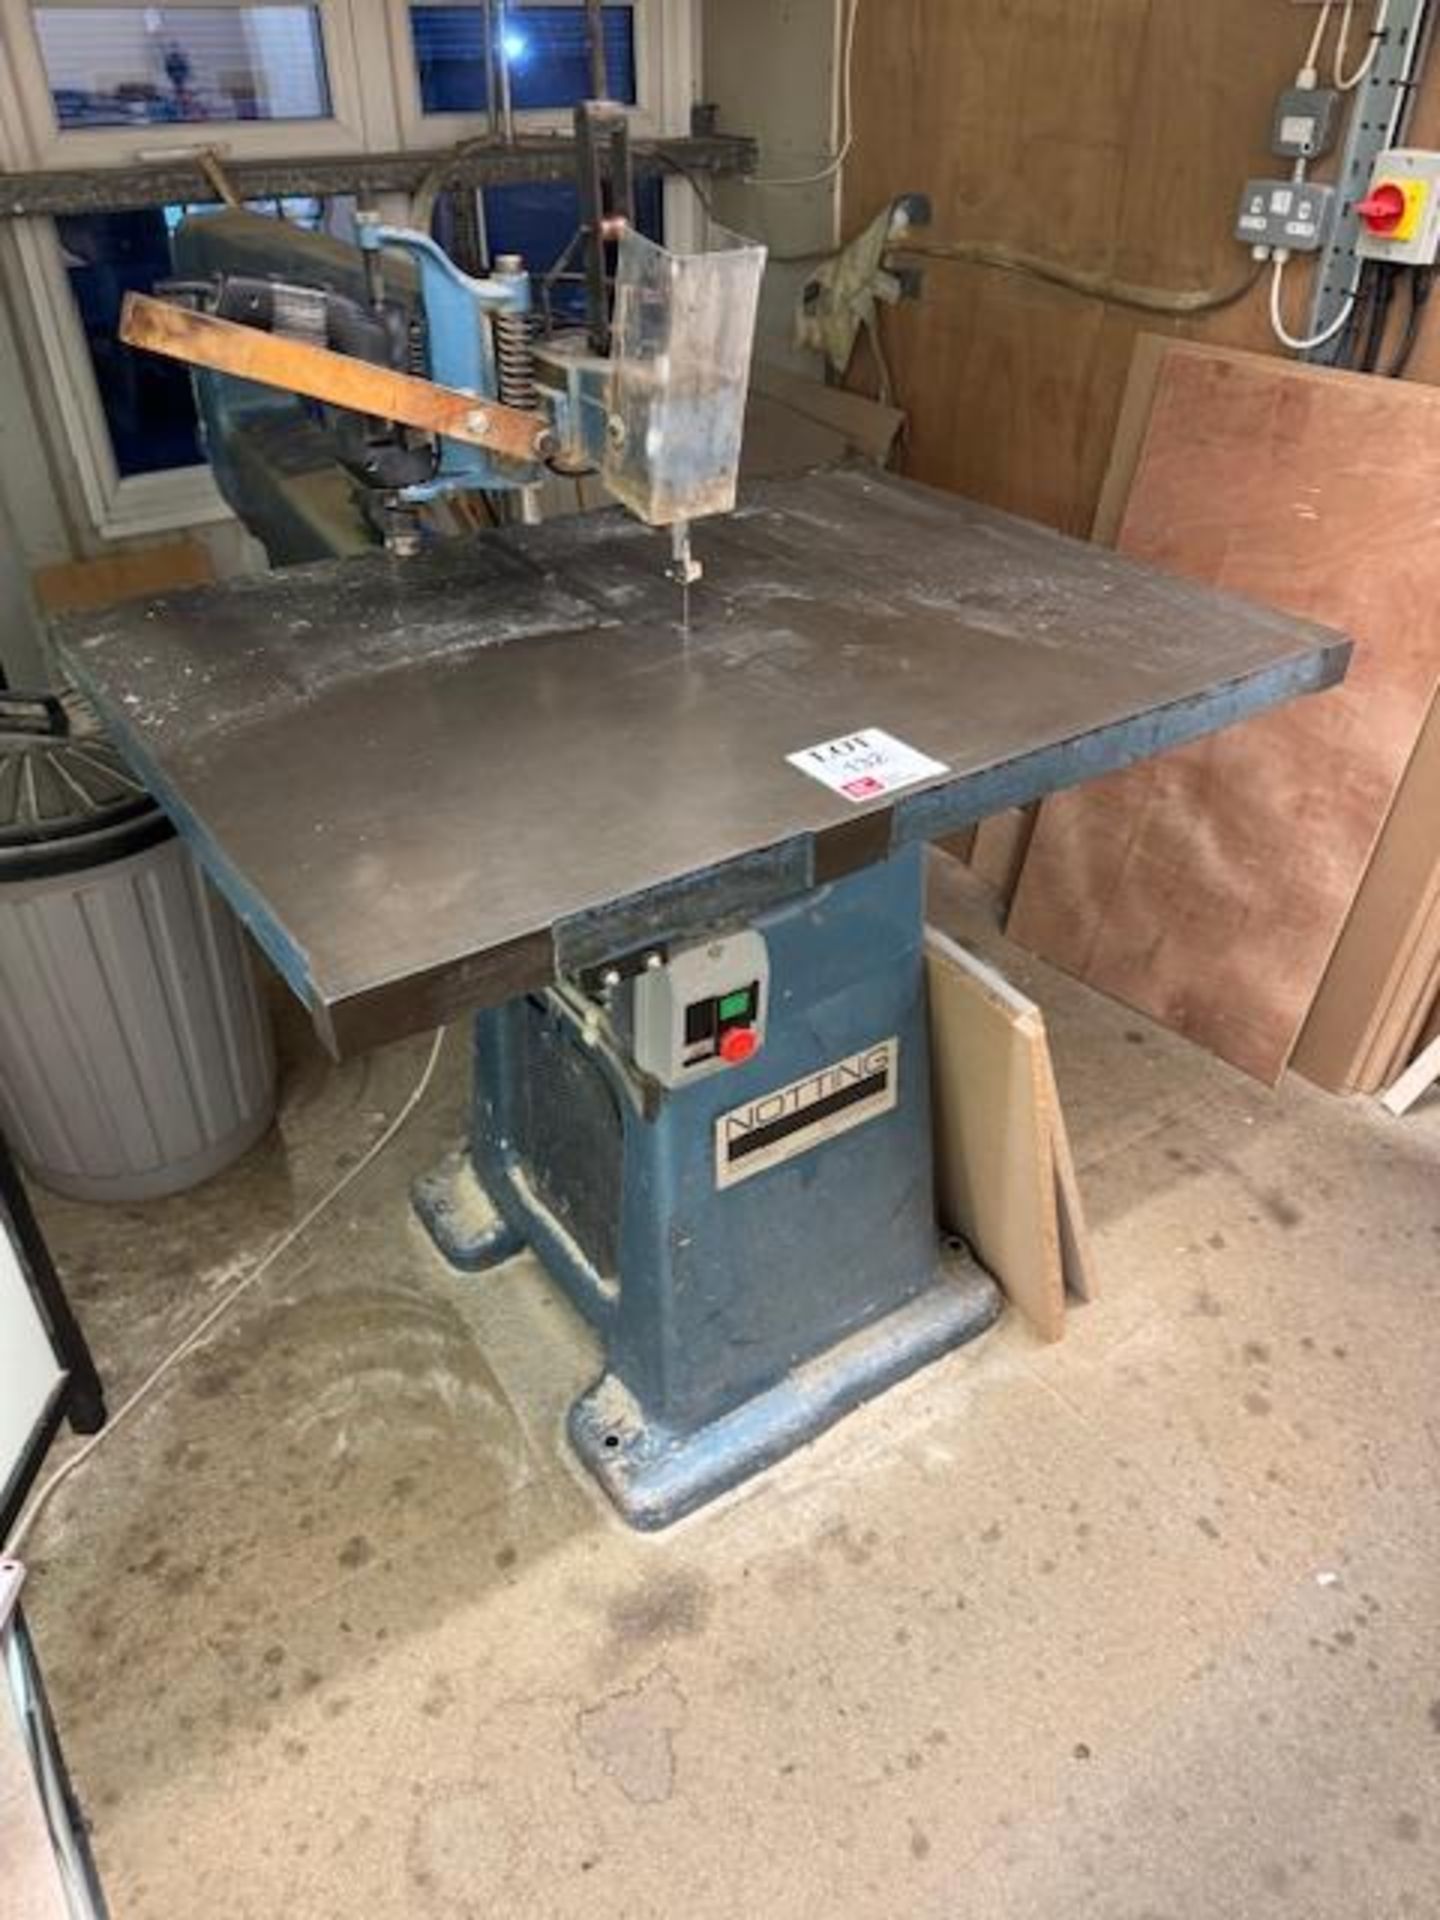 Notting band saw and drill combi, serial no. 740